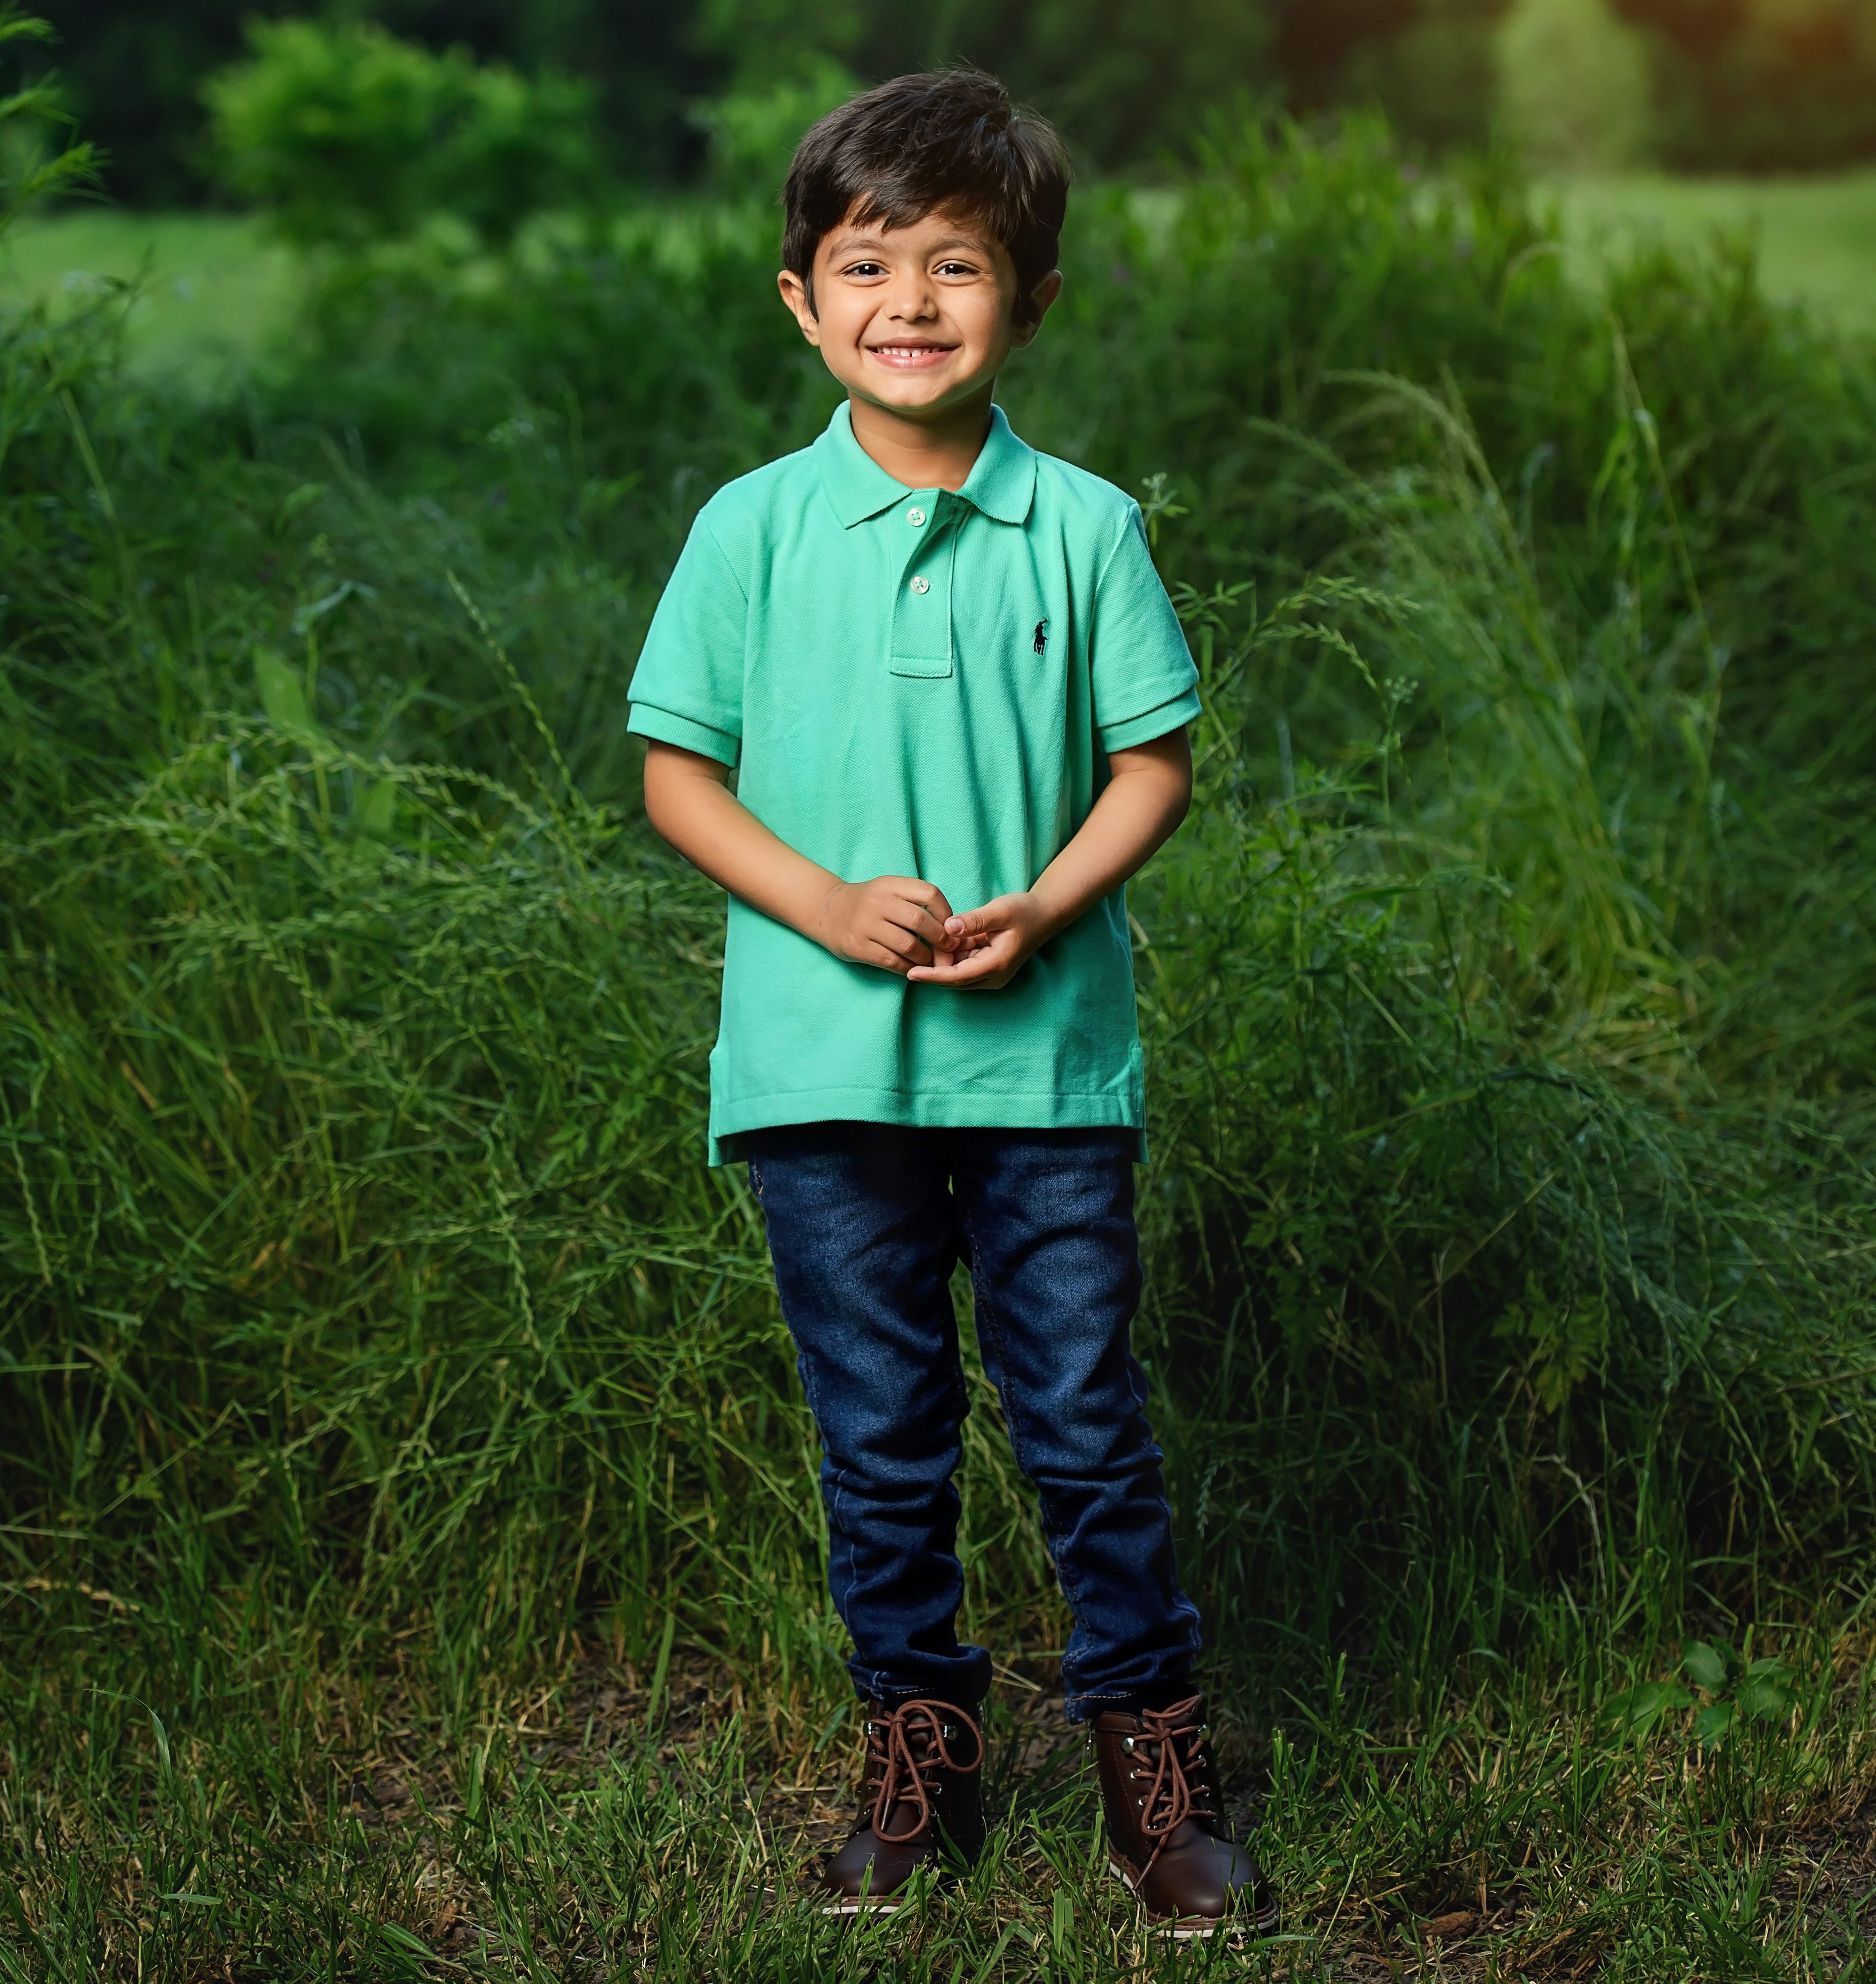 Photograph of child standing and smiling for children’s photography - Natalie Roberson Photography